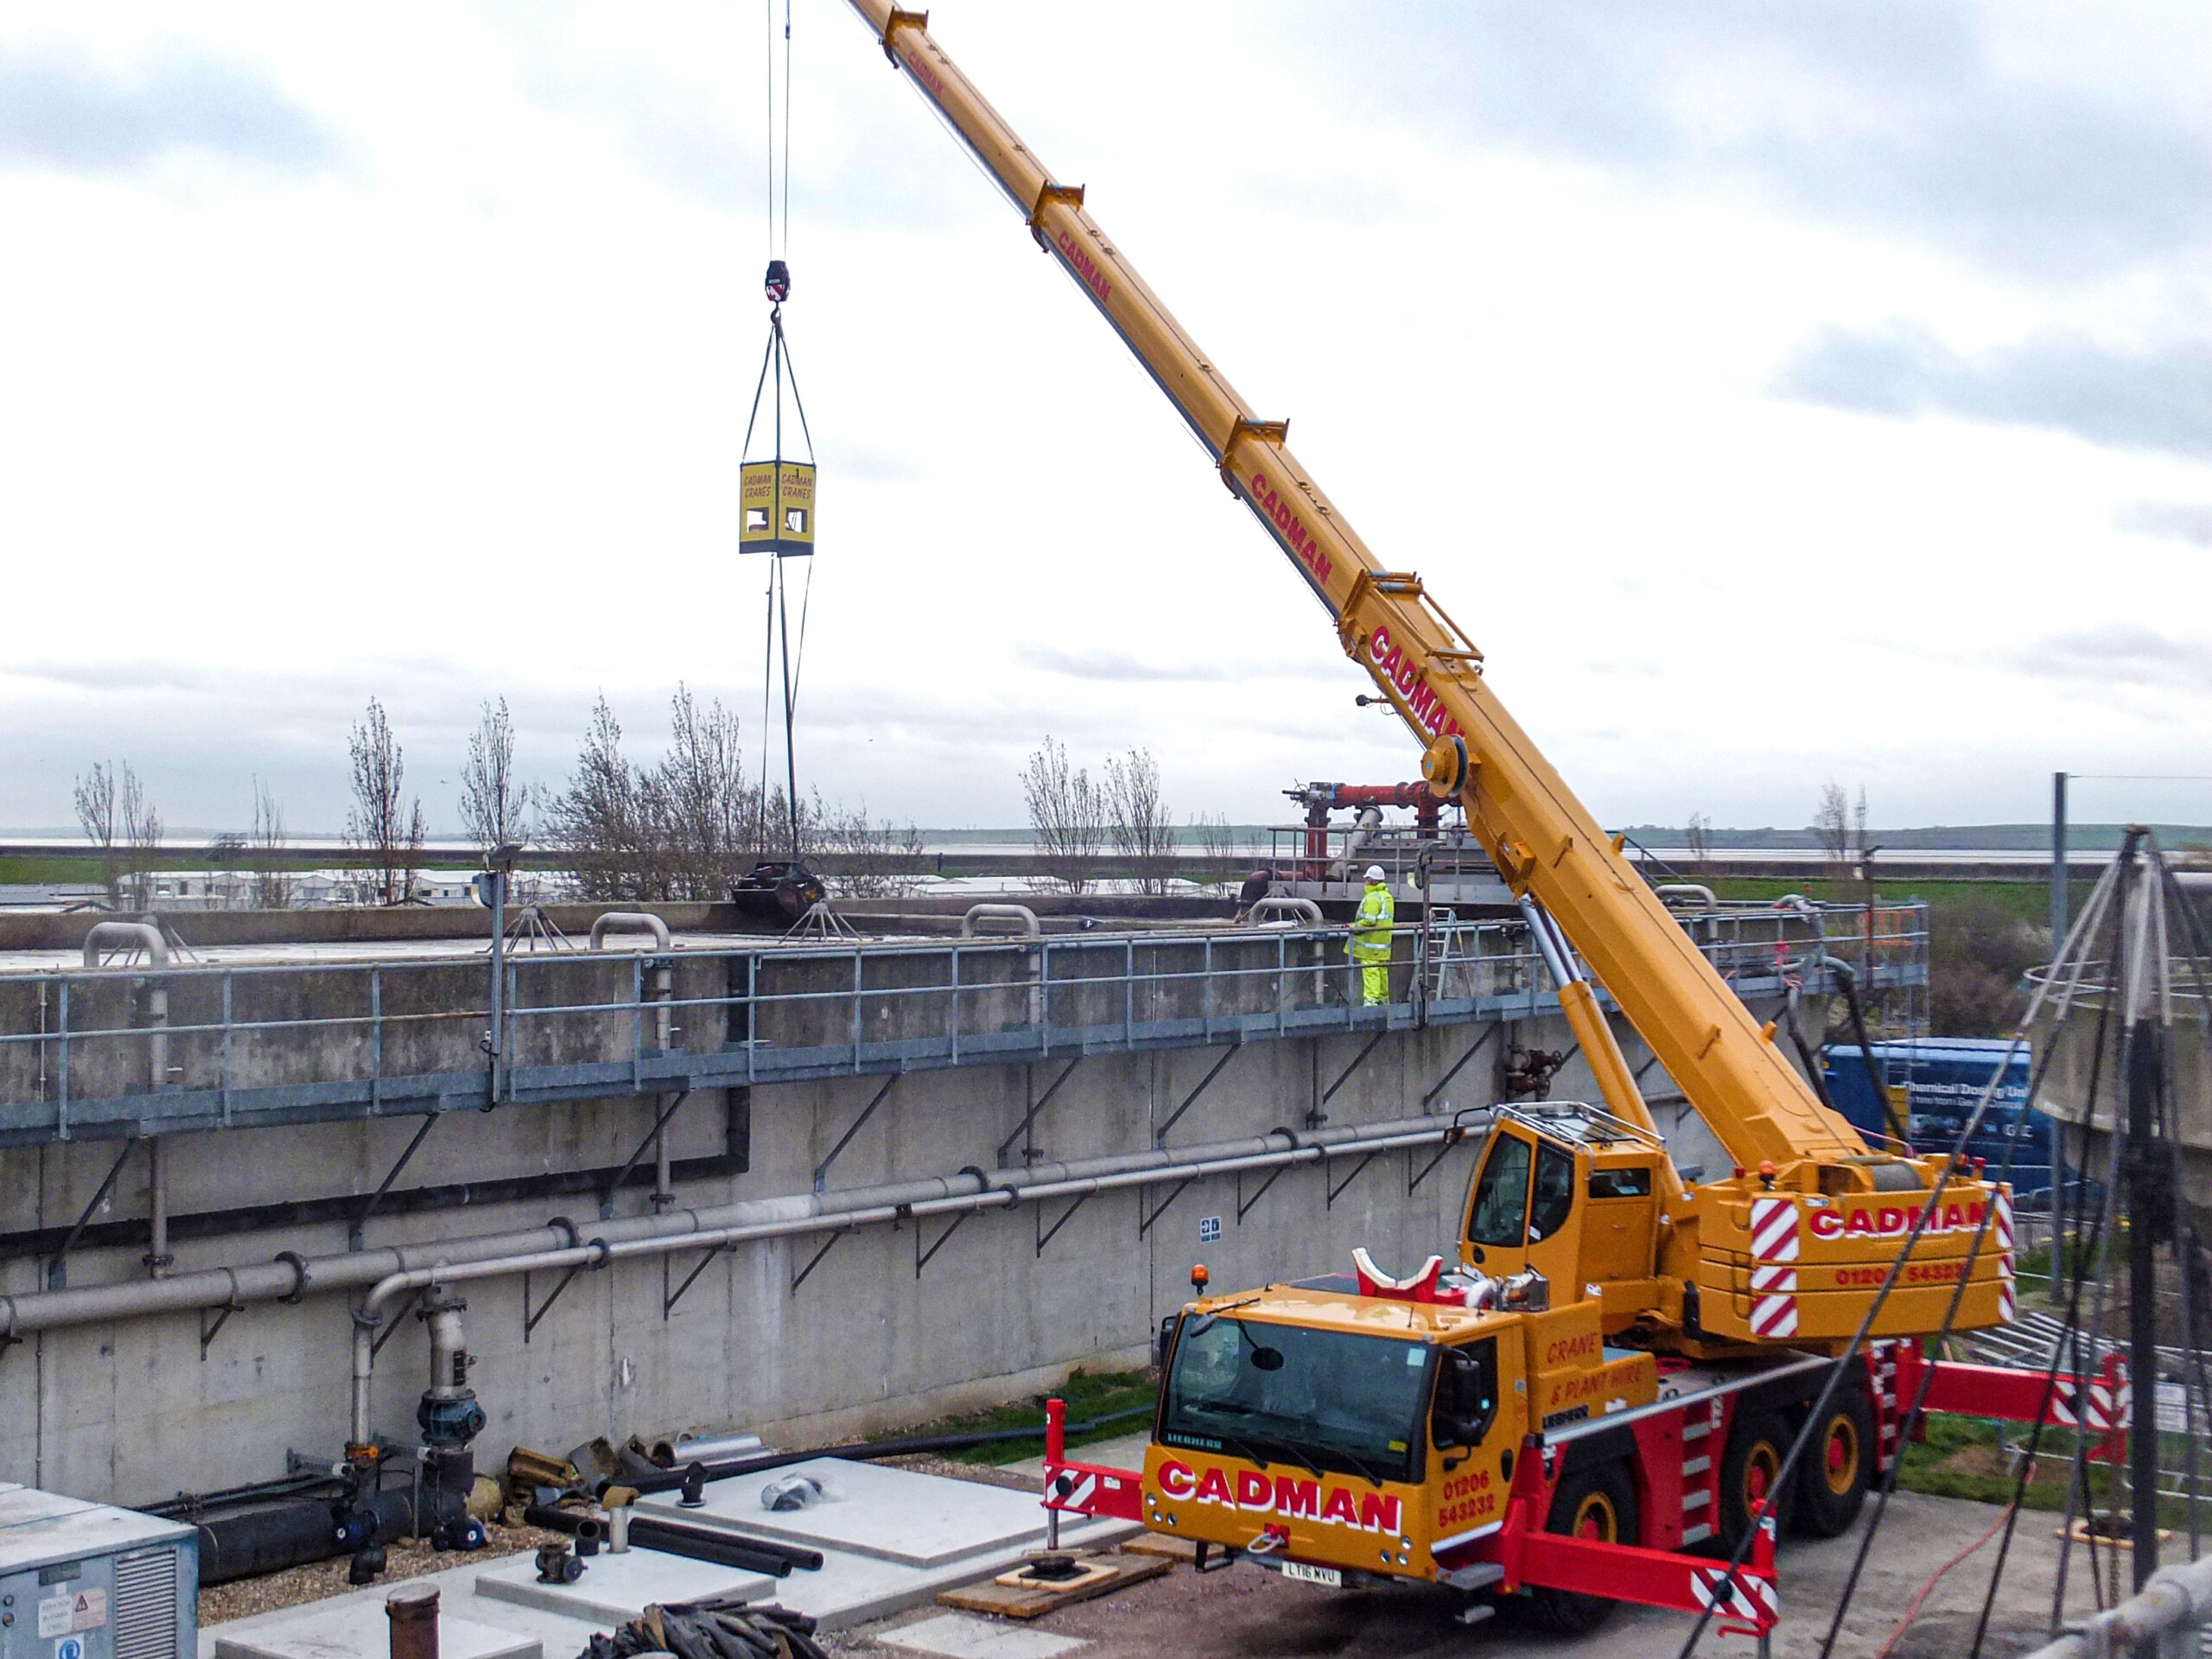 A mobile crane works at a wastewater facility with a remote-controlled grab